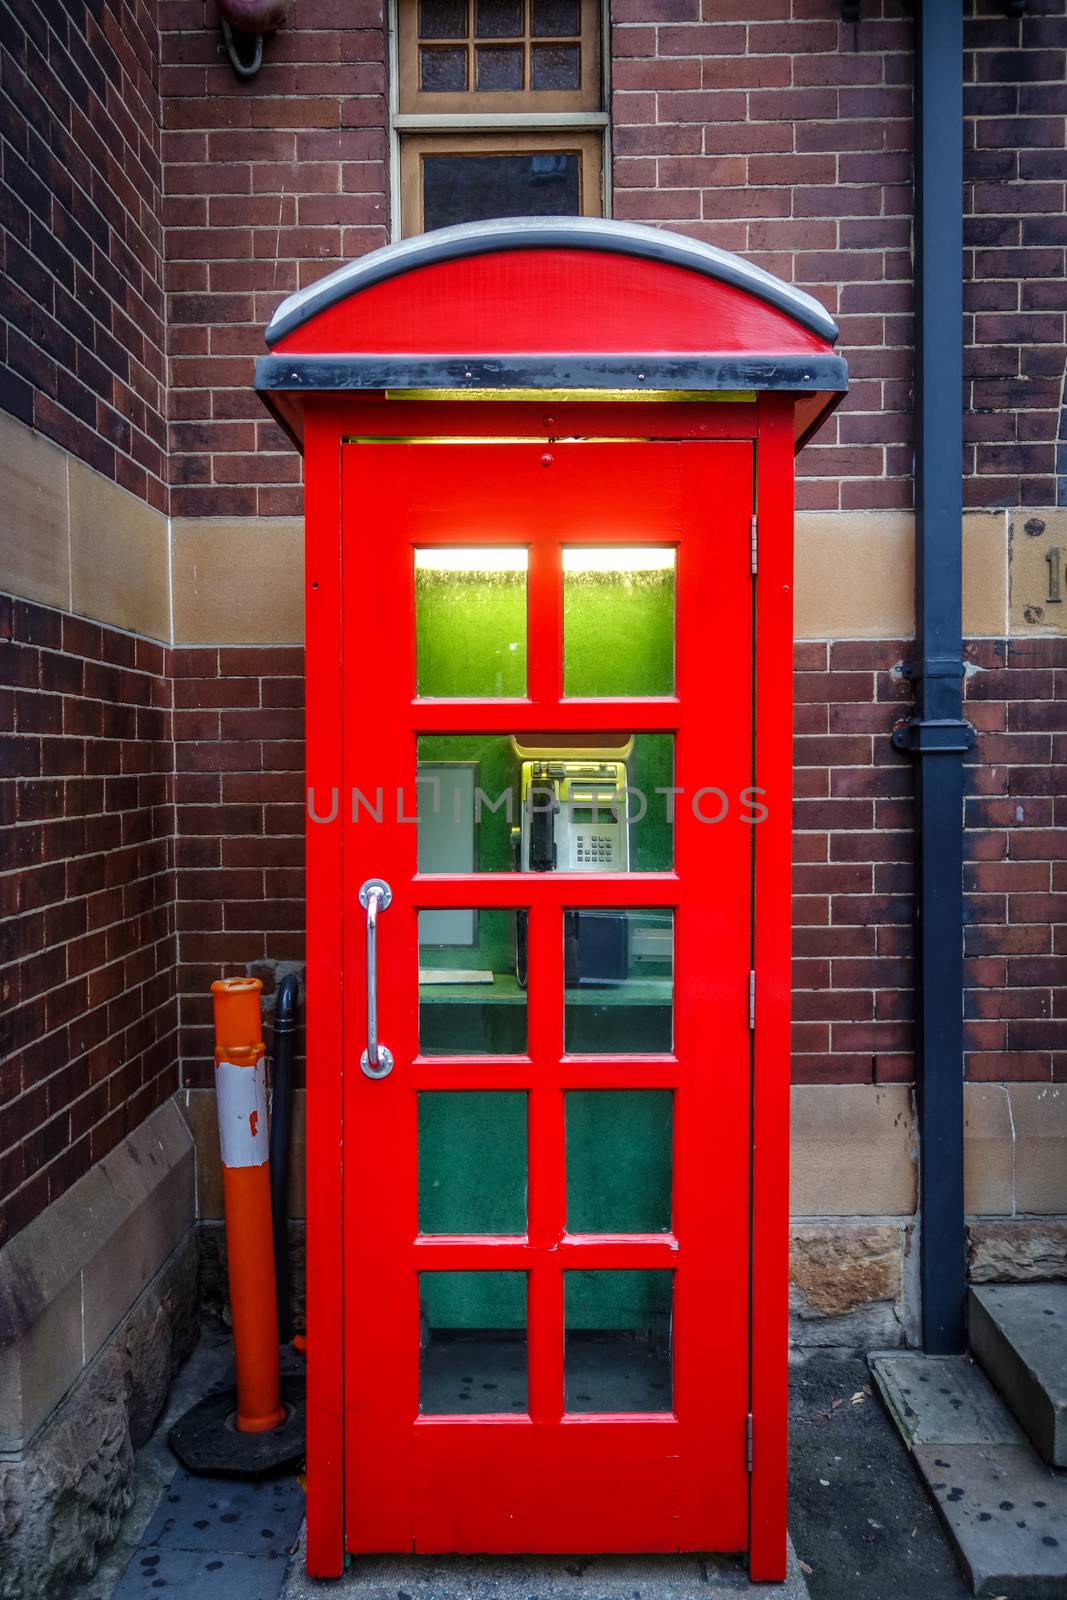 Vintage UK red phone booth in front of a brick wall